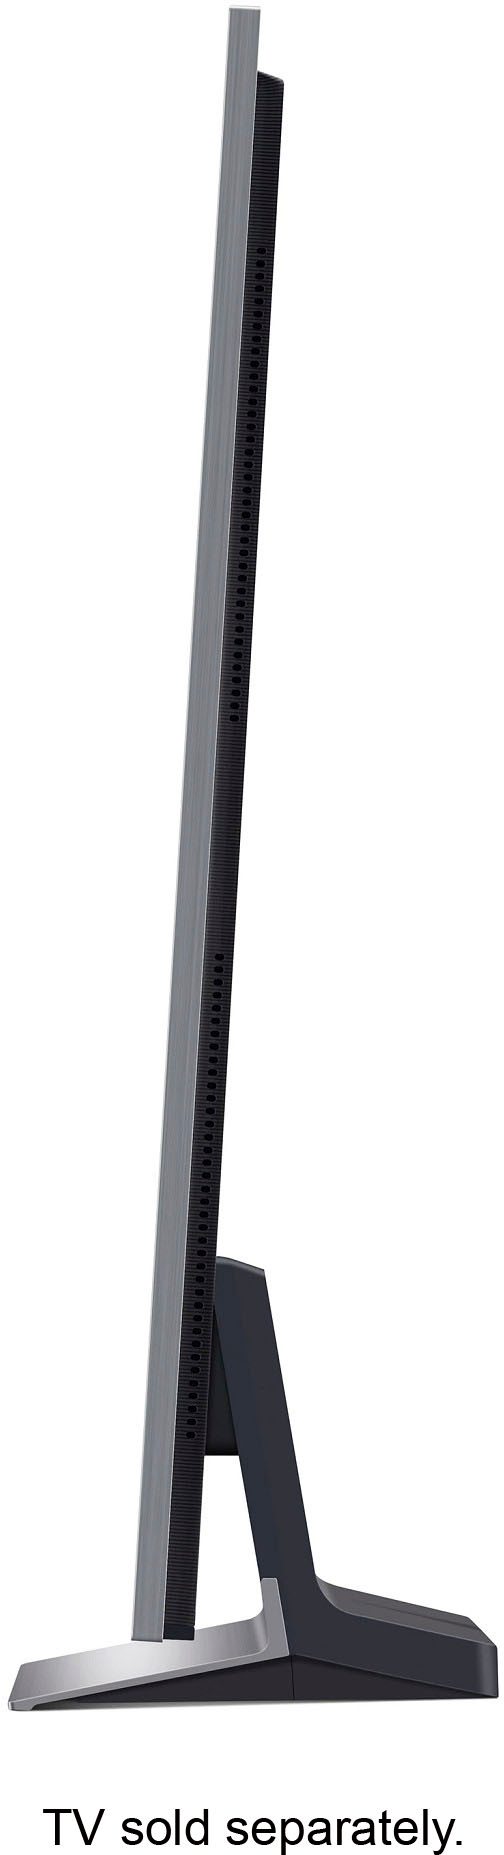 LG Stand & Back Cover for 55 G2/G3 OLED TVs (2022/2023)